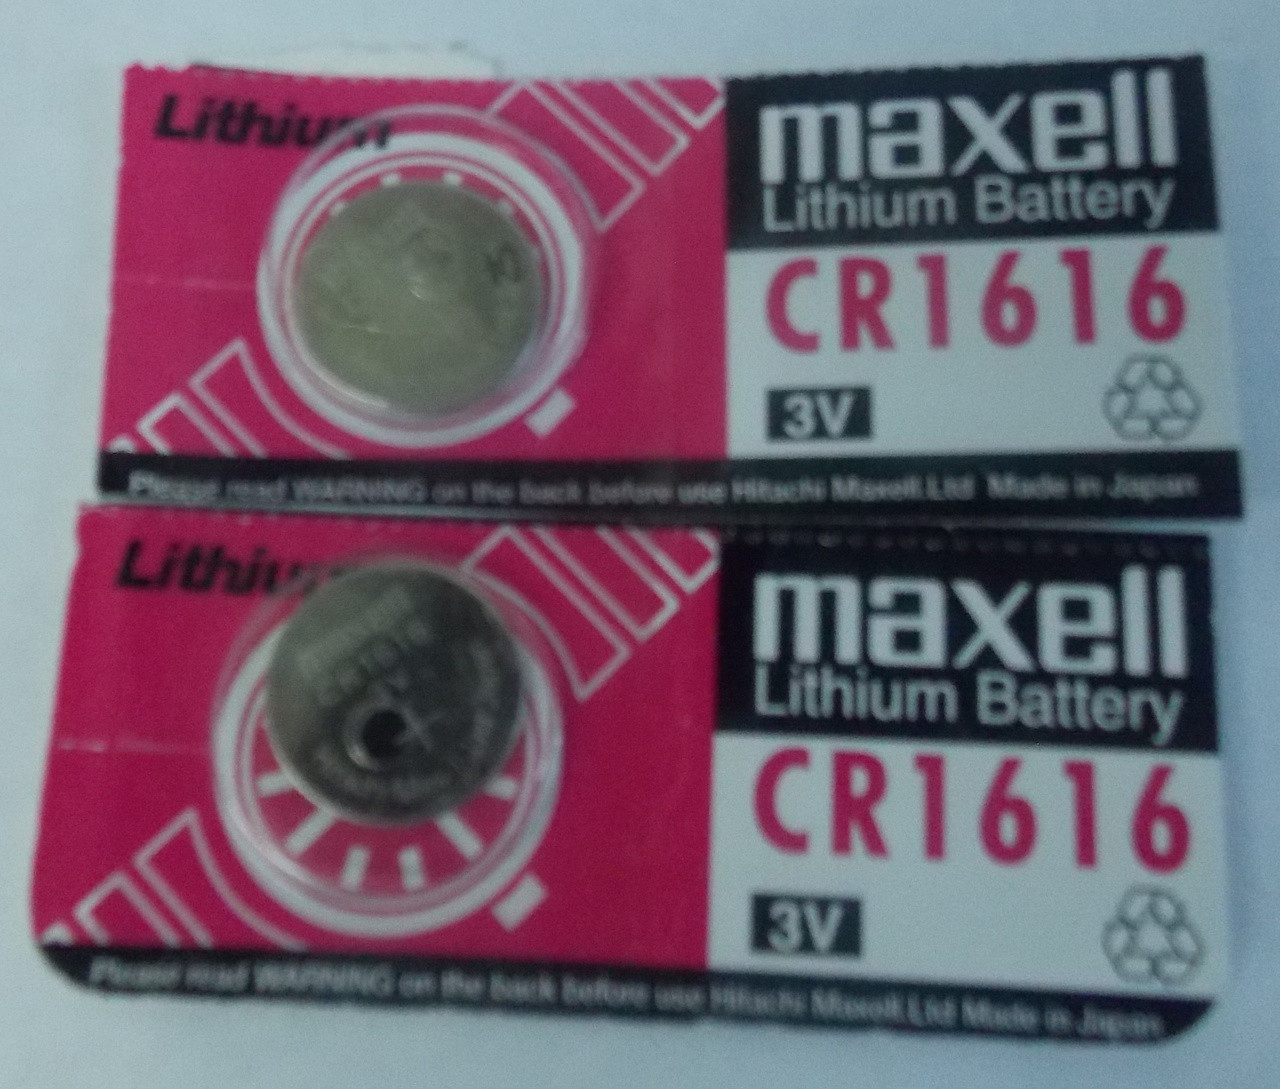 Maxell CR1616 3 Volt Lithium Coin Battery - 2 Pack FREE SHIPPING